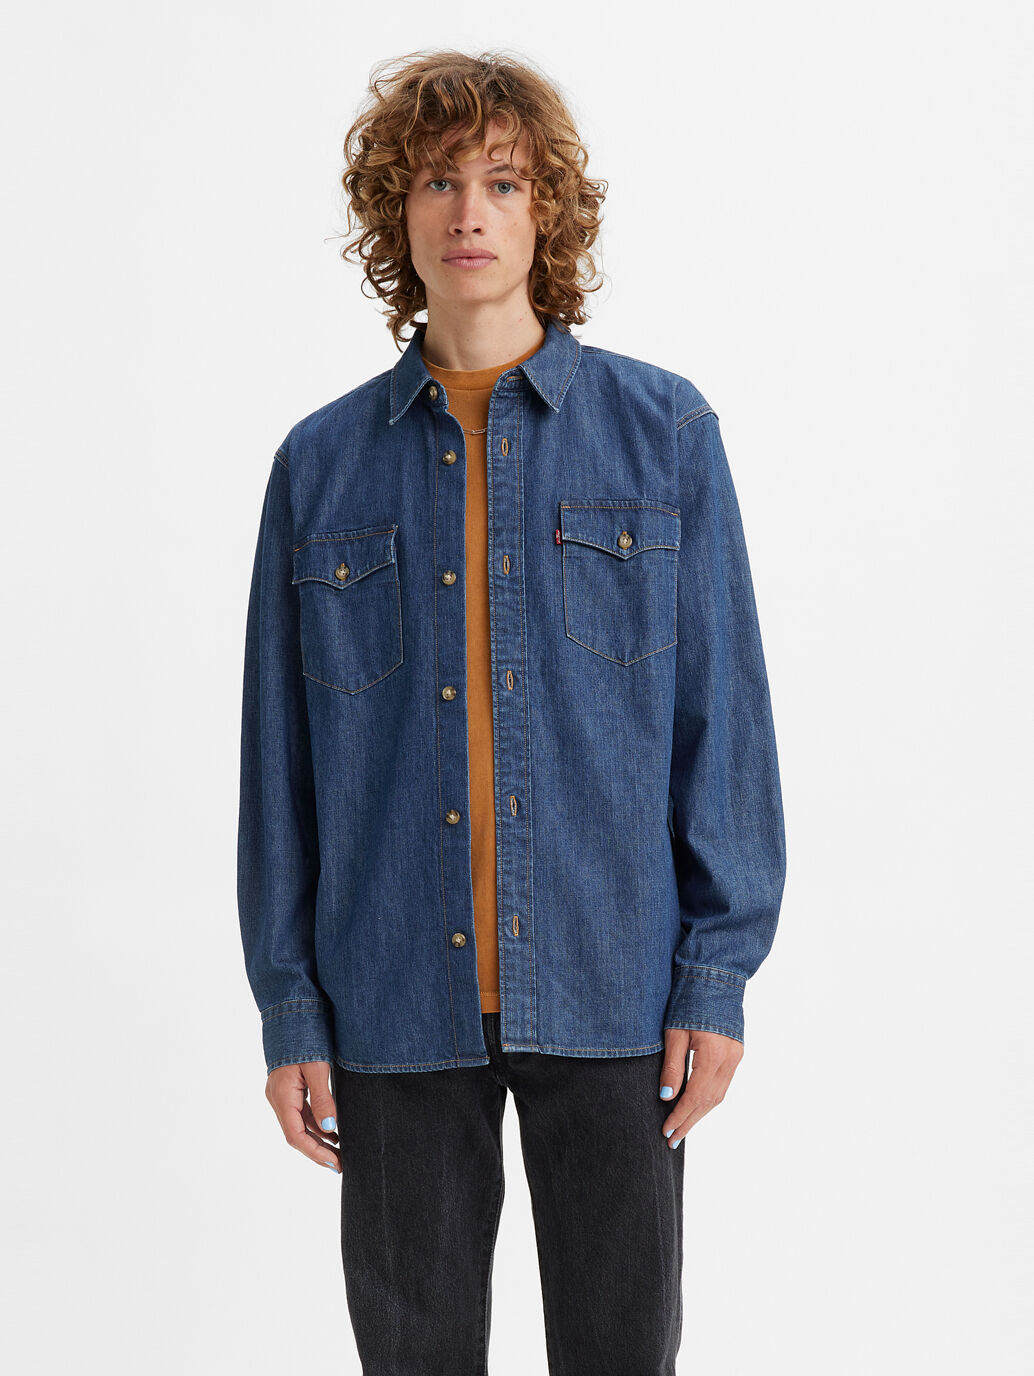 Men's Relaxed Fit Western Shirt in Dark Blue - 100% Cotton